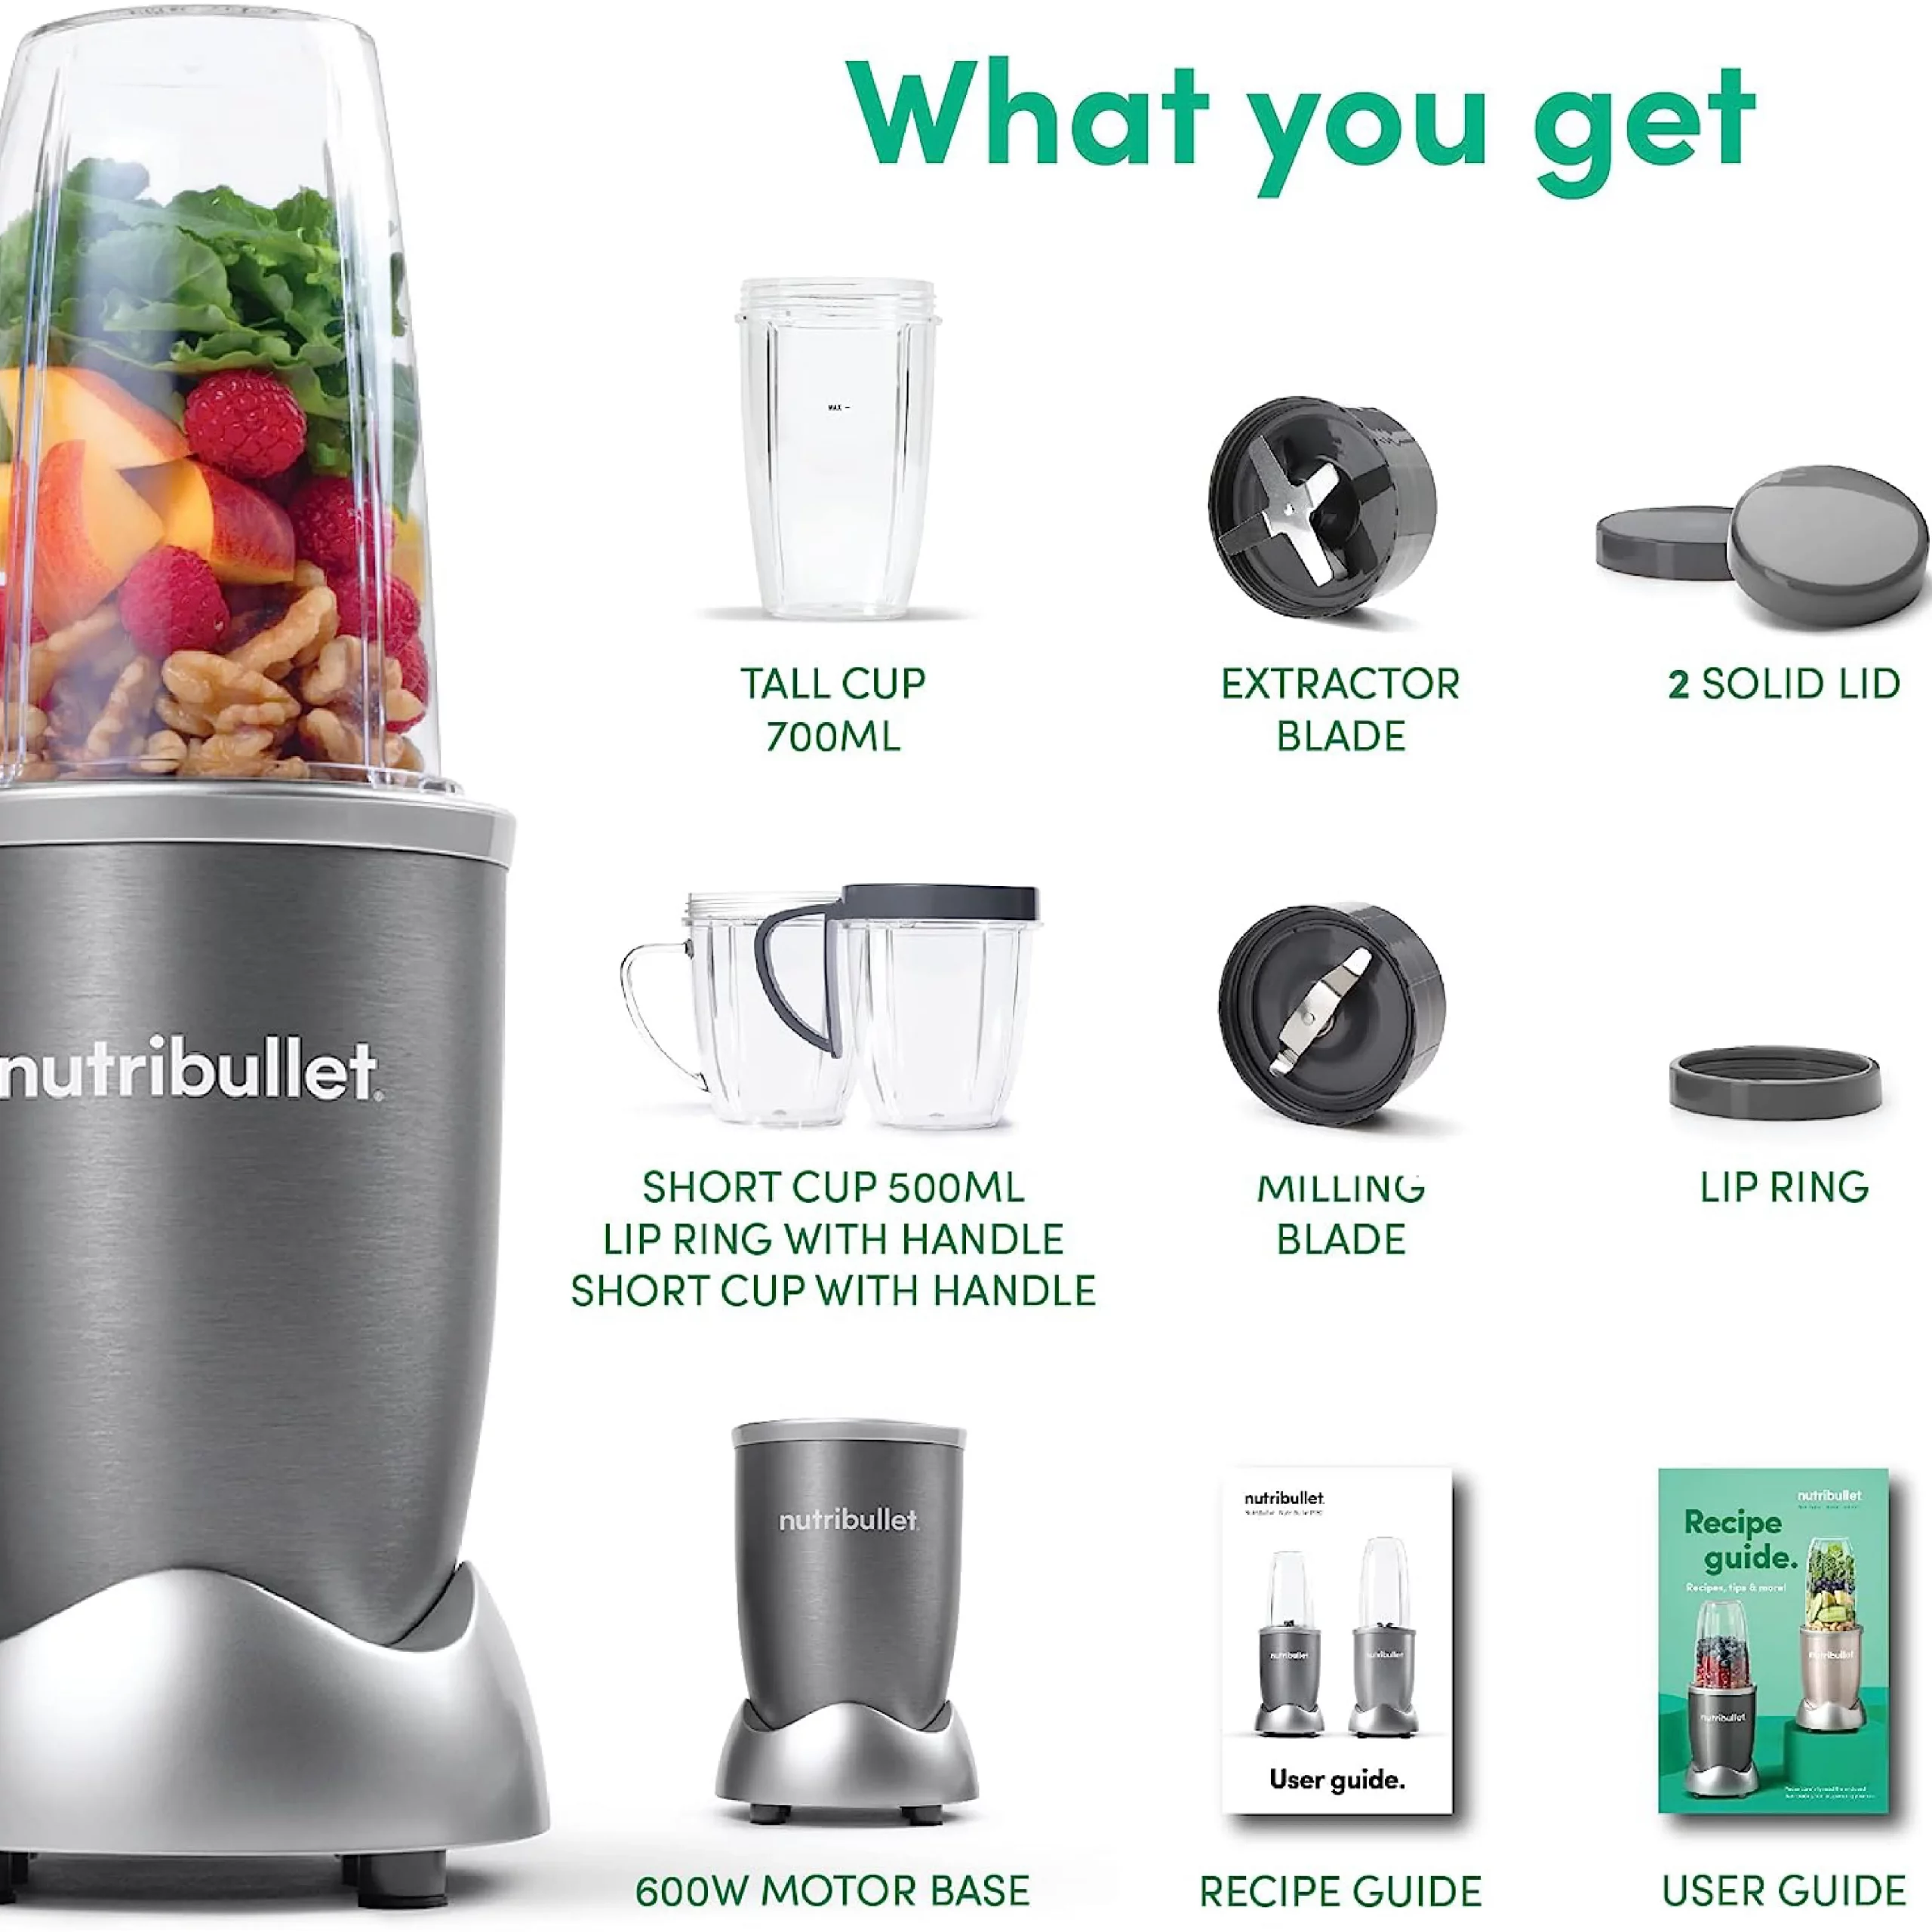 Meet the original nutribullet 600, our compact-yet-powerful 600-watt personal  blender. You choose what goes in to get the most out of every…